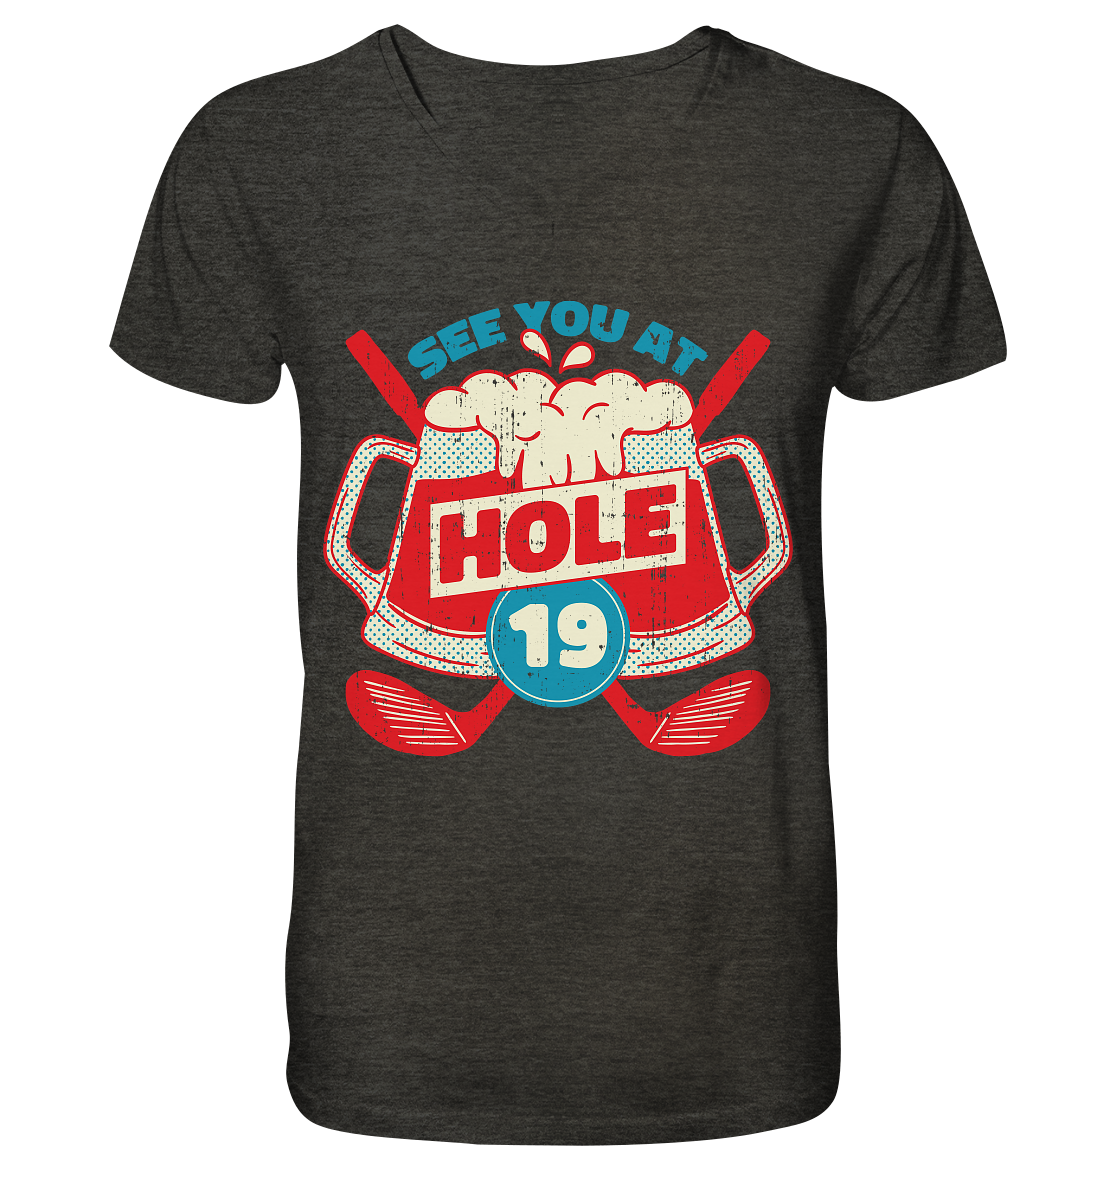 Golf ,See you at Hole 19 , Wir sehen uns bei Loch 19 - Mens Organic V-Neck Shirt